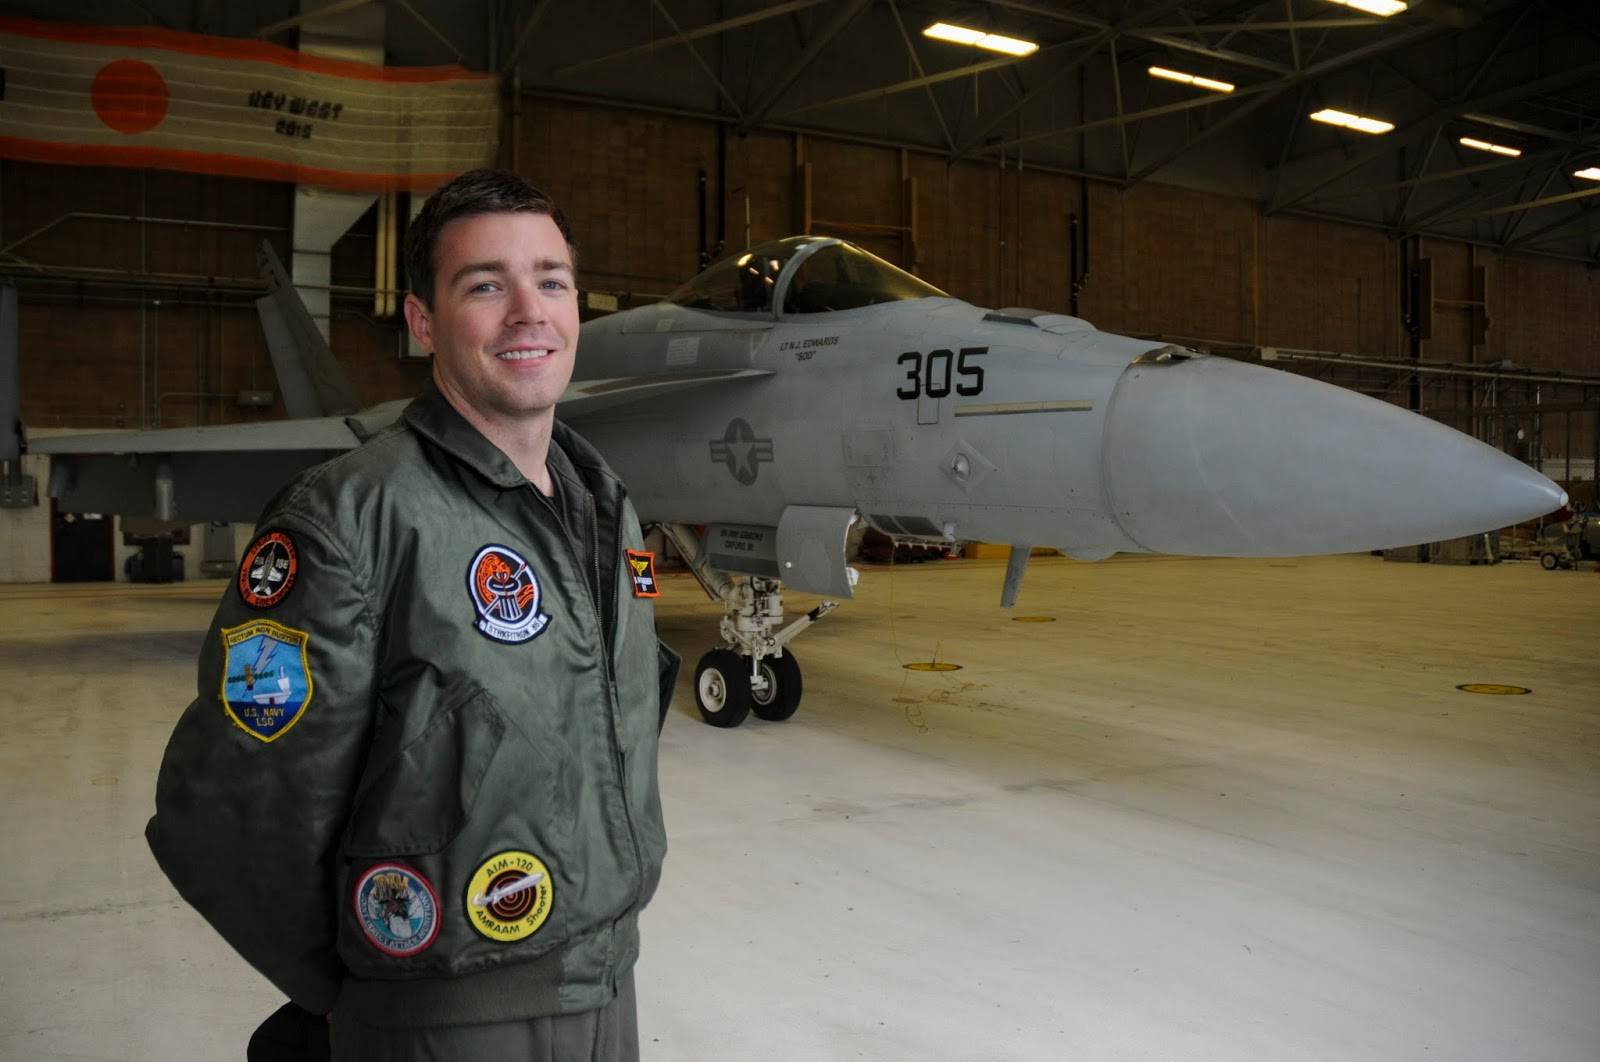 Bothell High School graduate and Bothell native Sean Krueger is serving in the U.S. Navy. Contributed photo